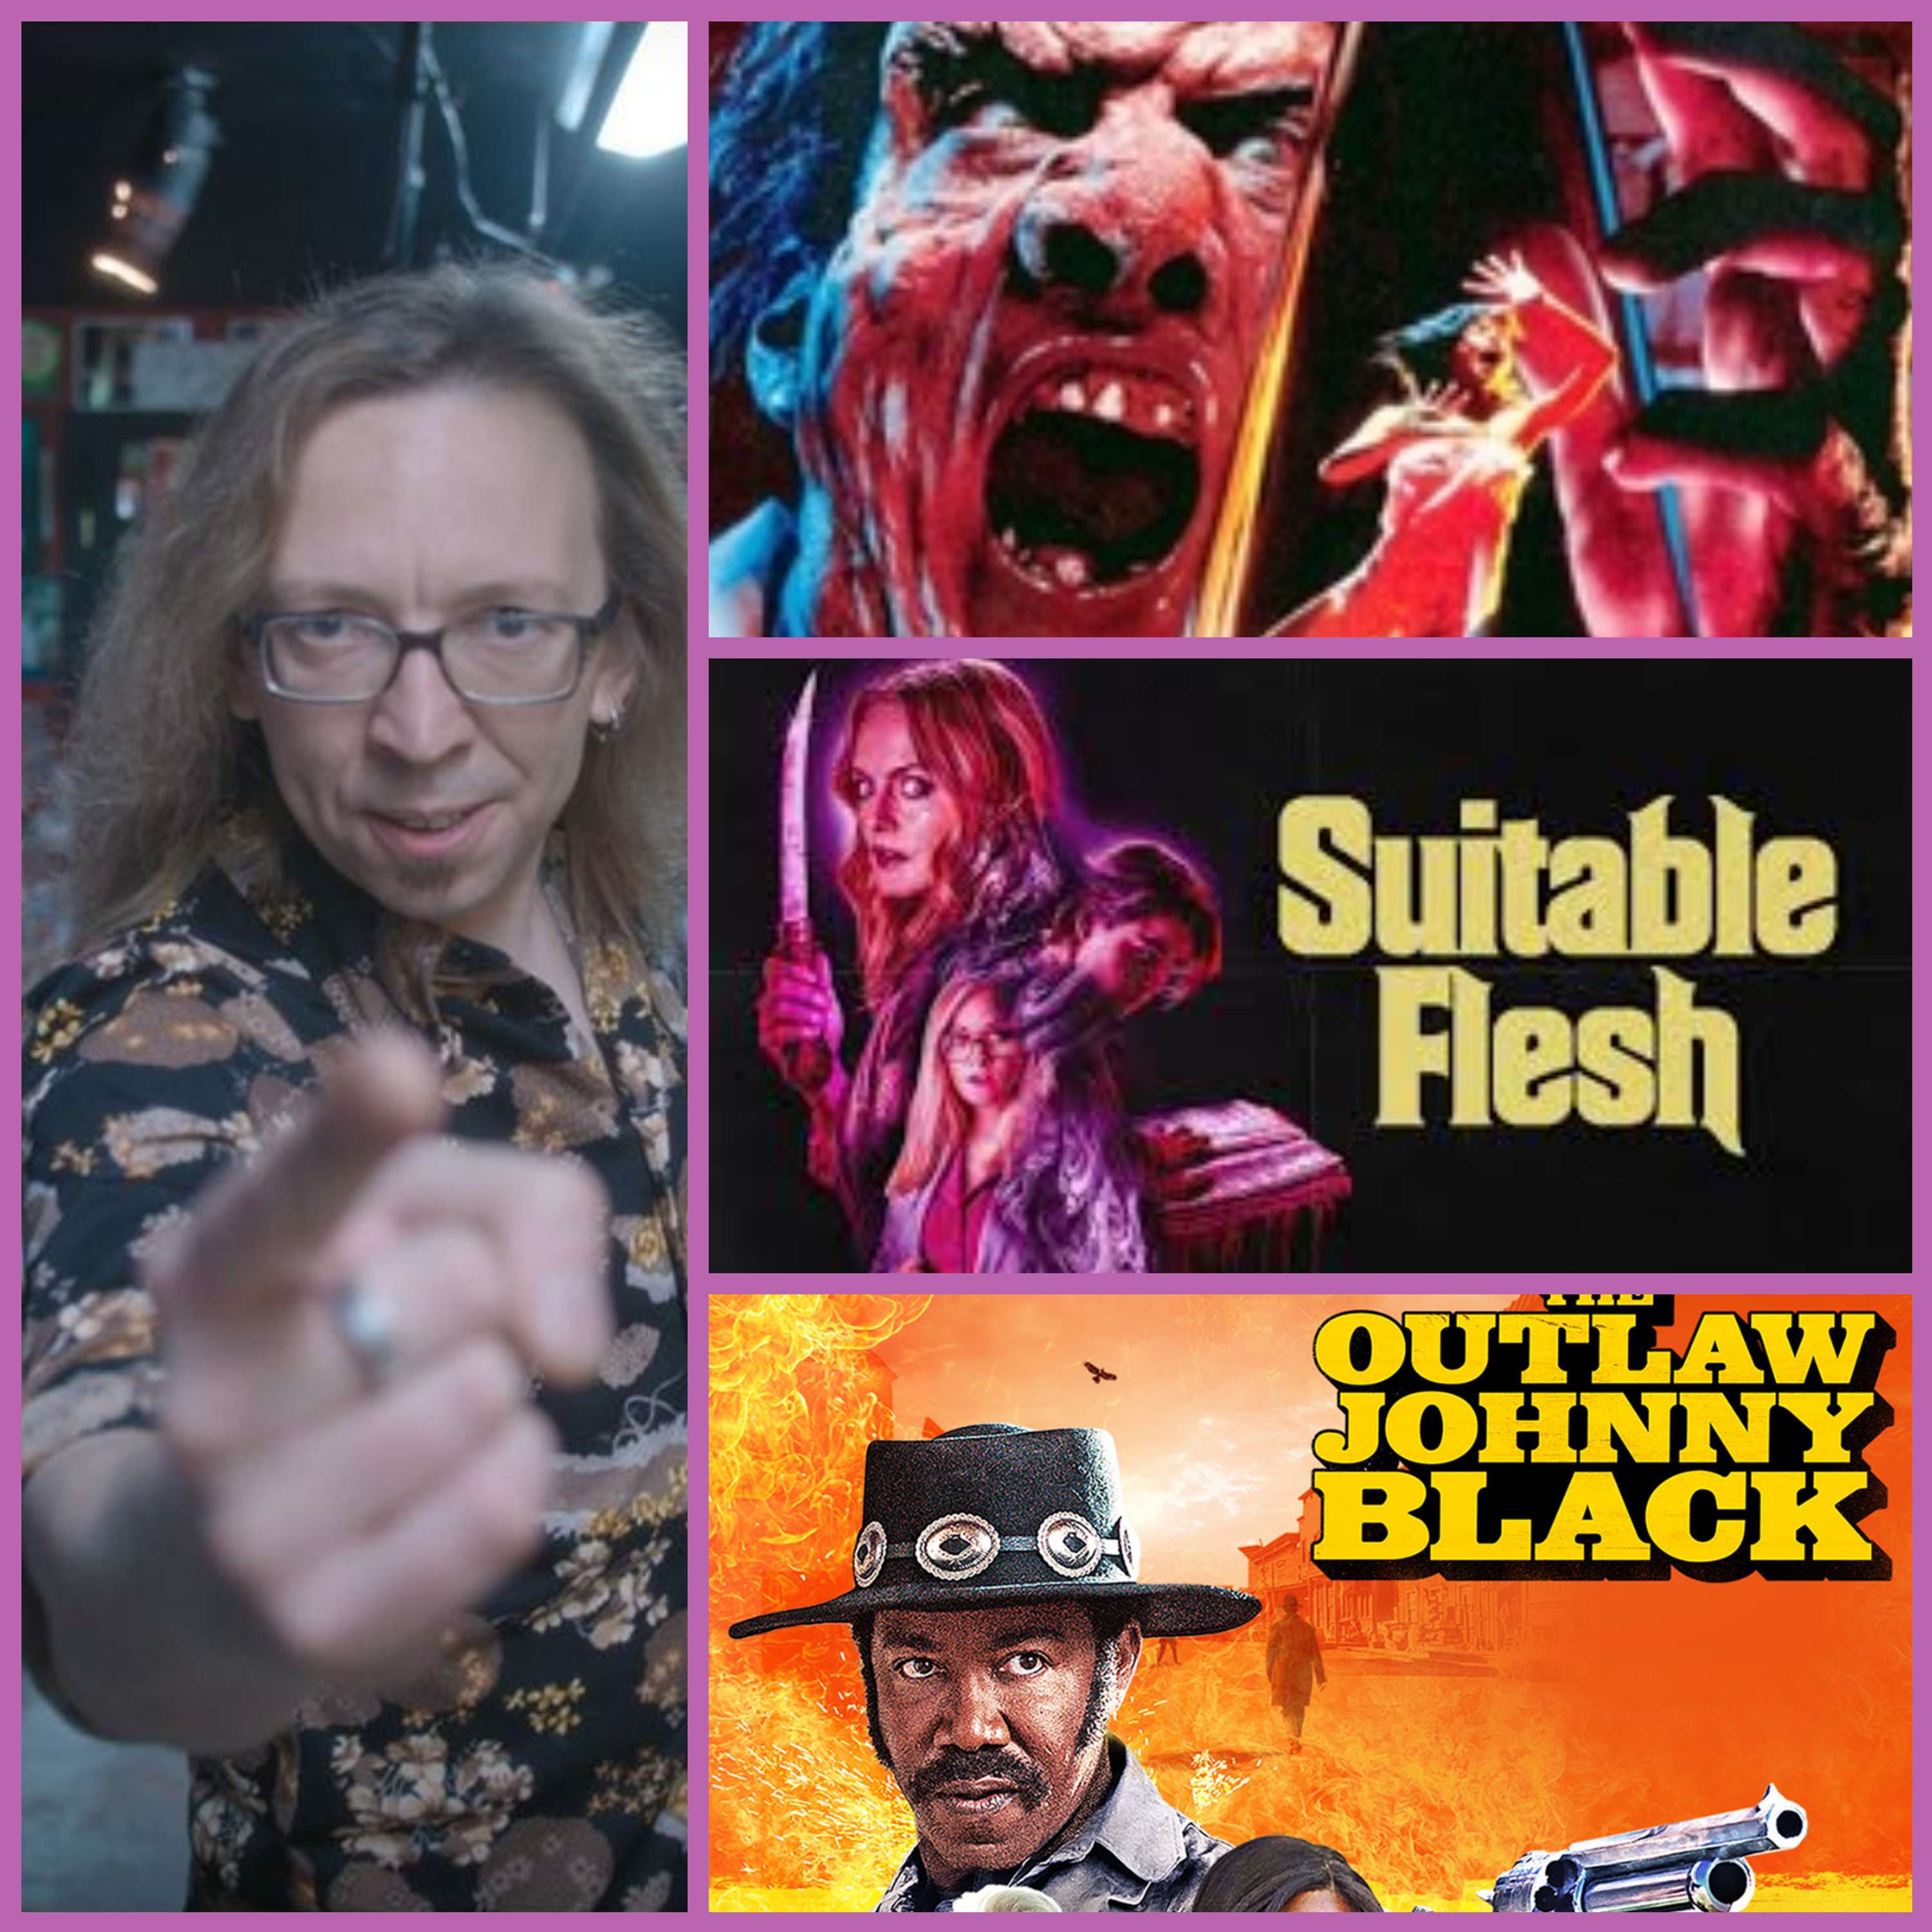 KEVIN MARTIN (The Lobby DVD Shop) Outlaw Johnny Black, Suitable Flesh and Clive Barker's Underworld